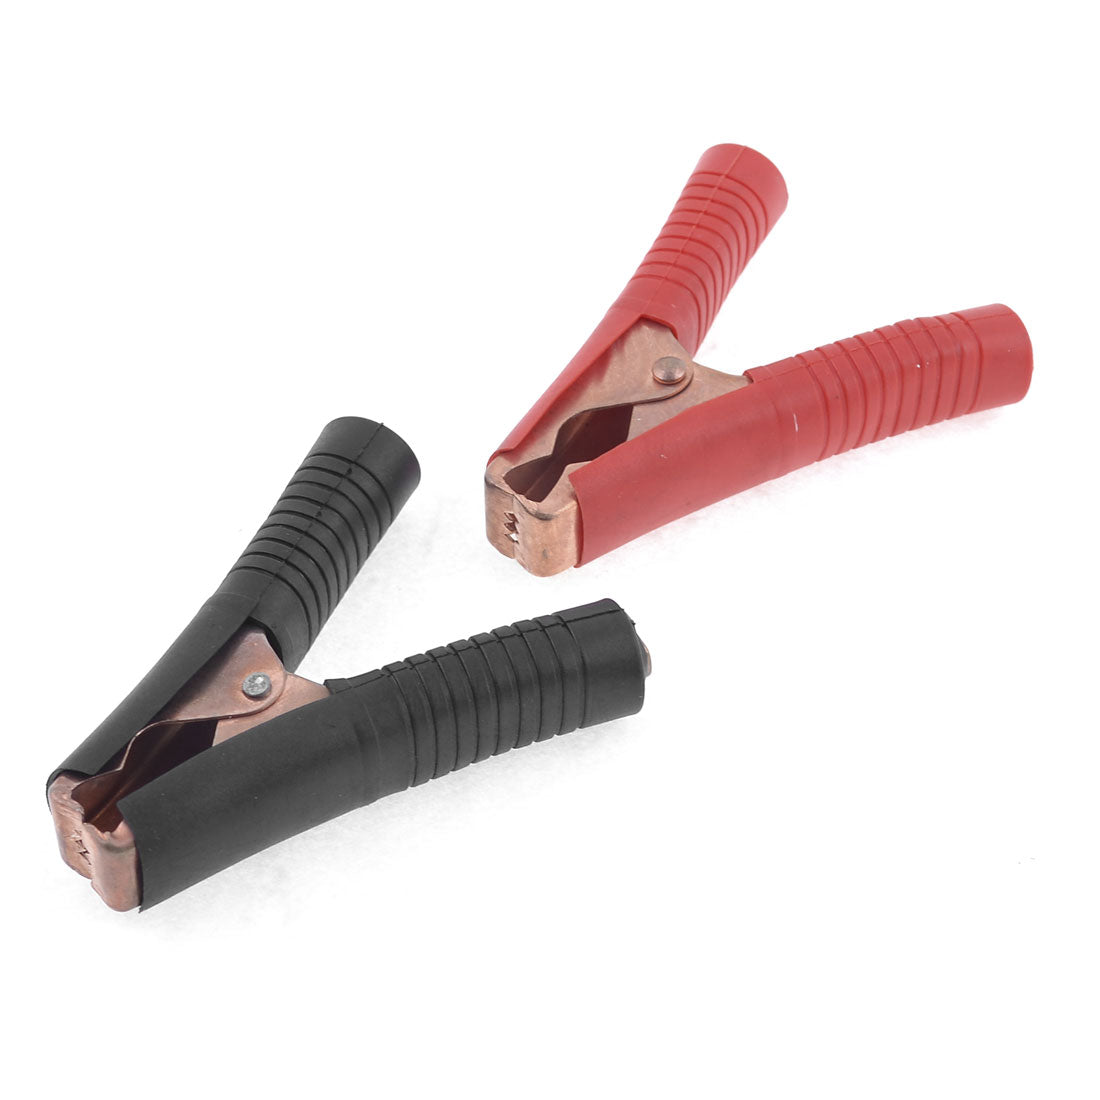 uxcell Uxcell 200A Car Auto Battery Black Red Plastic Handle Alligator Test Clamps Clips Pair